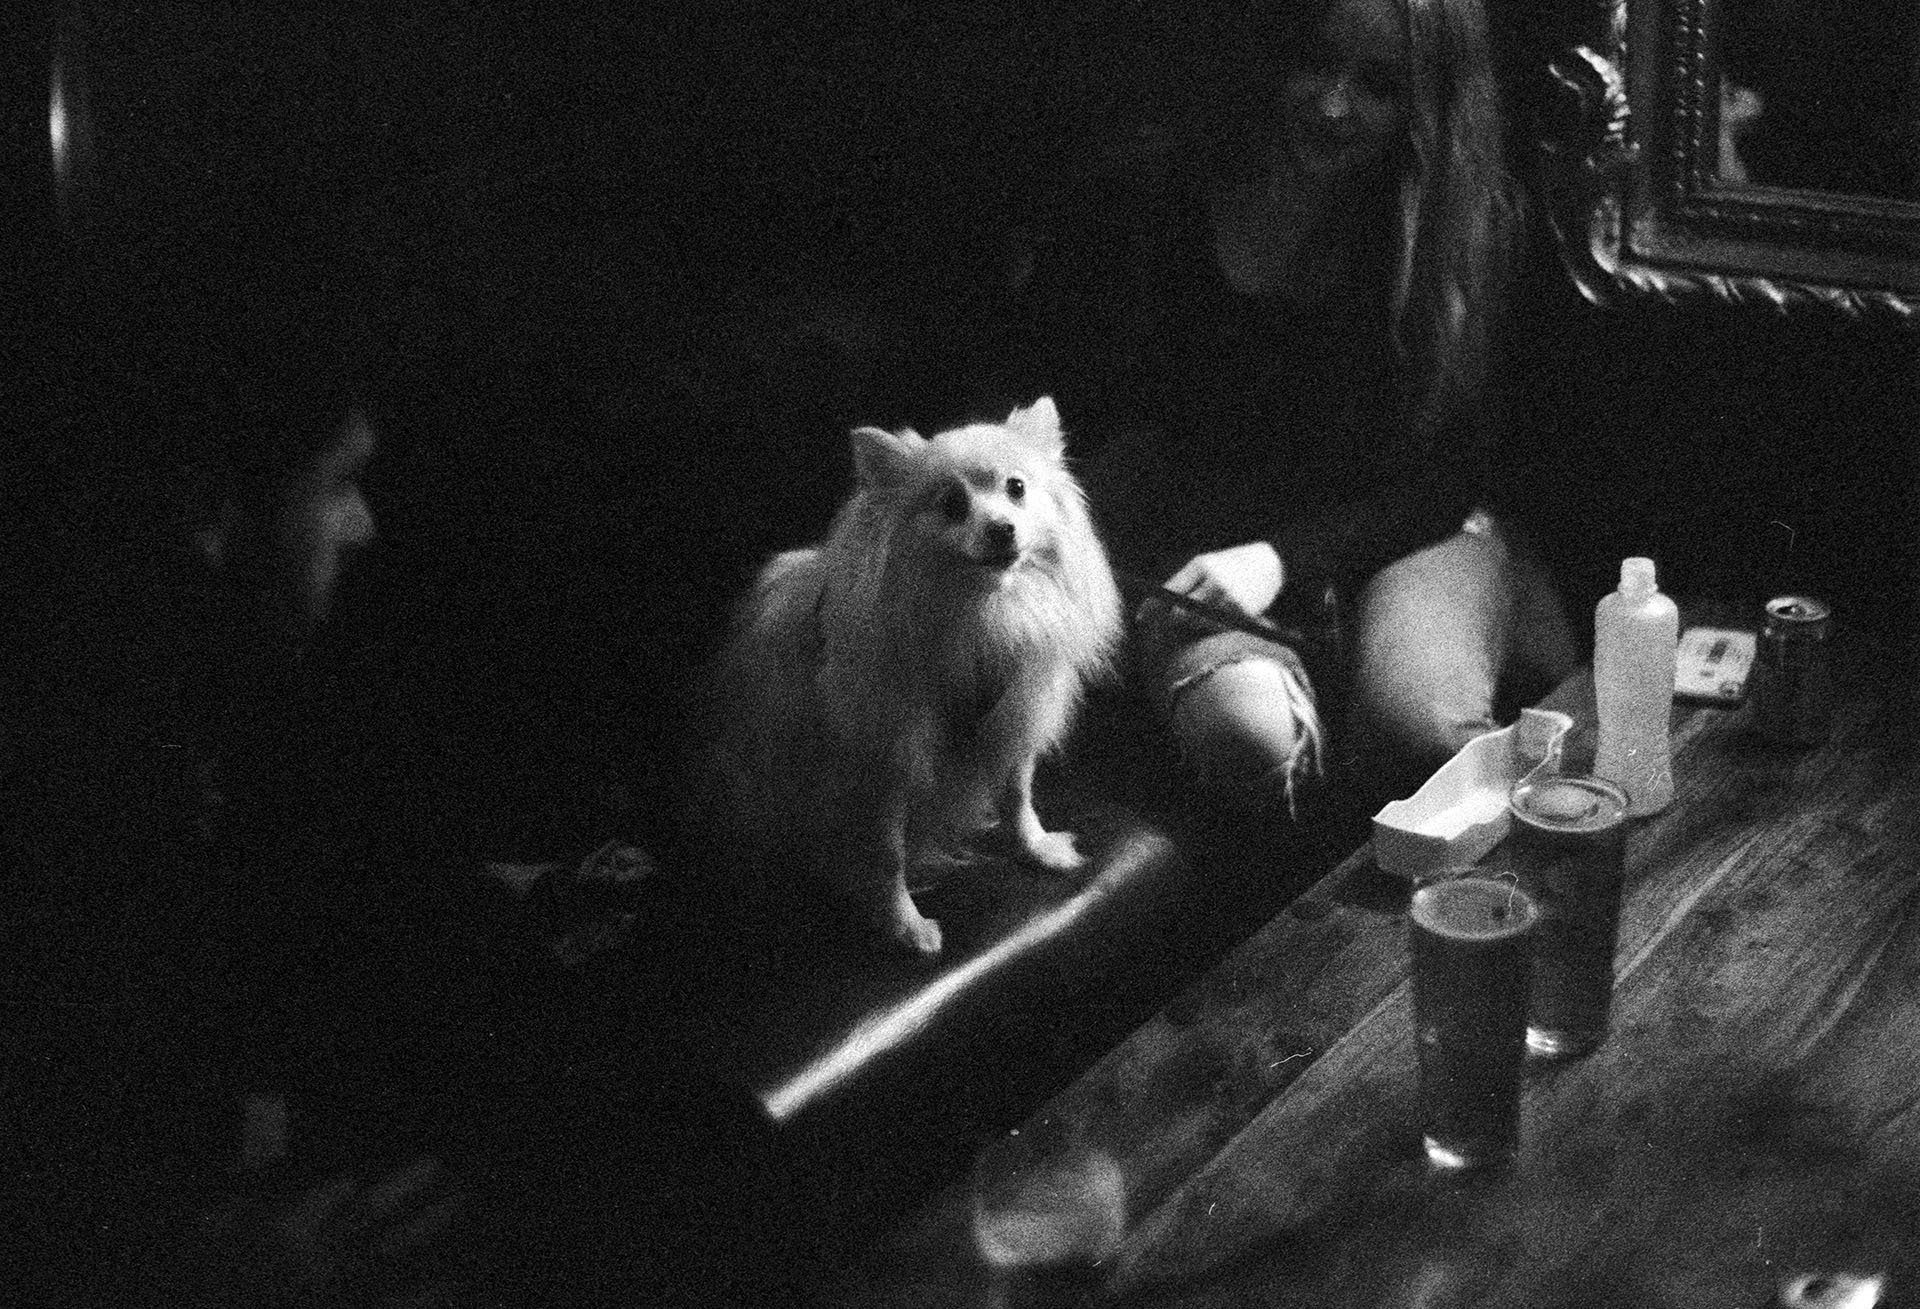 Dogs in pubs